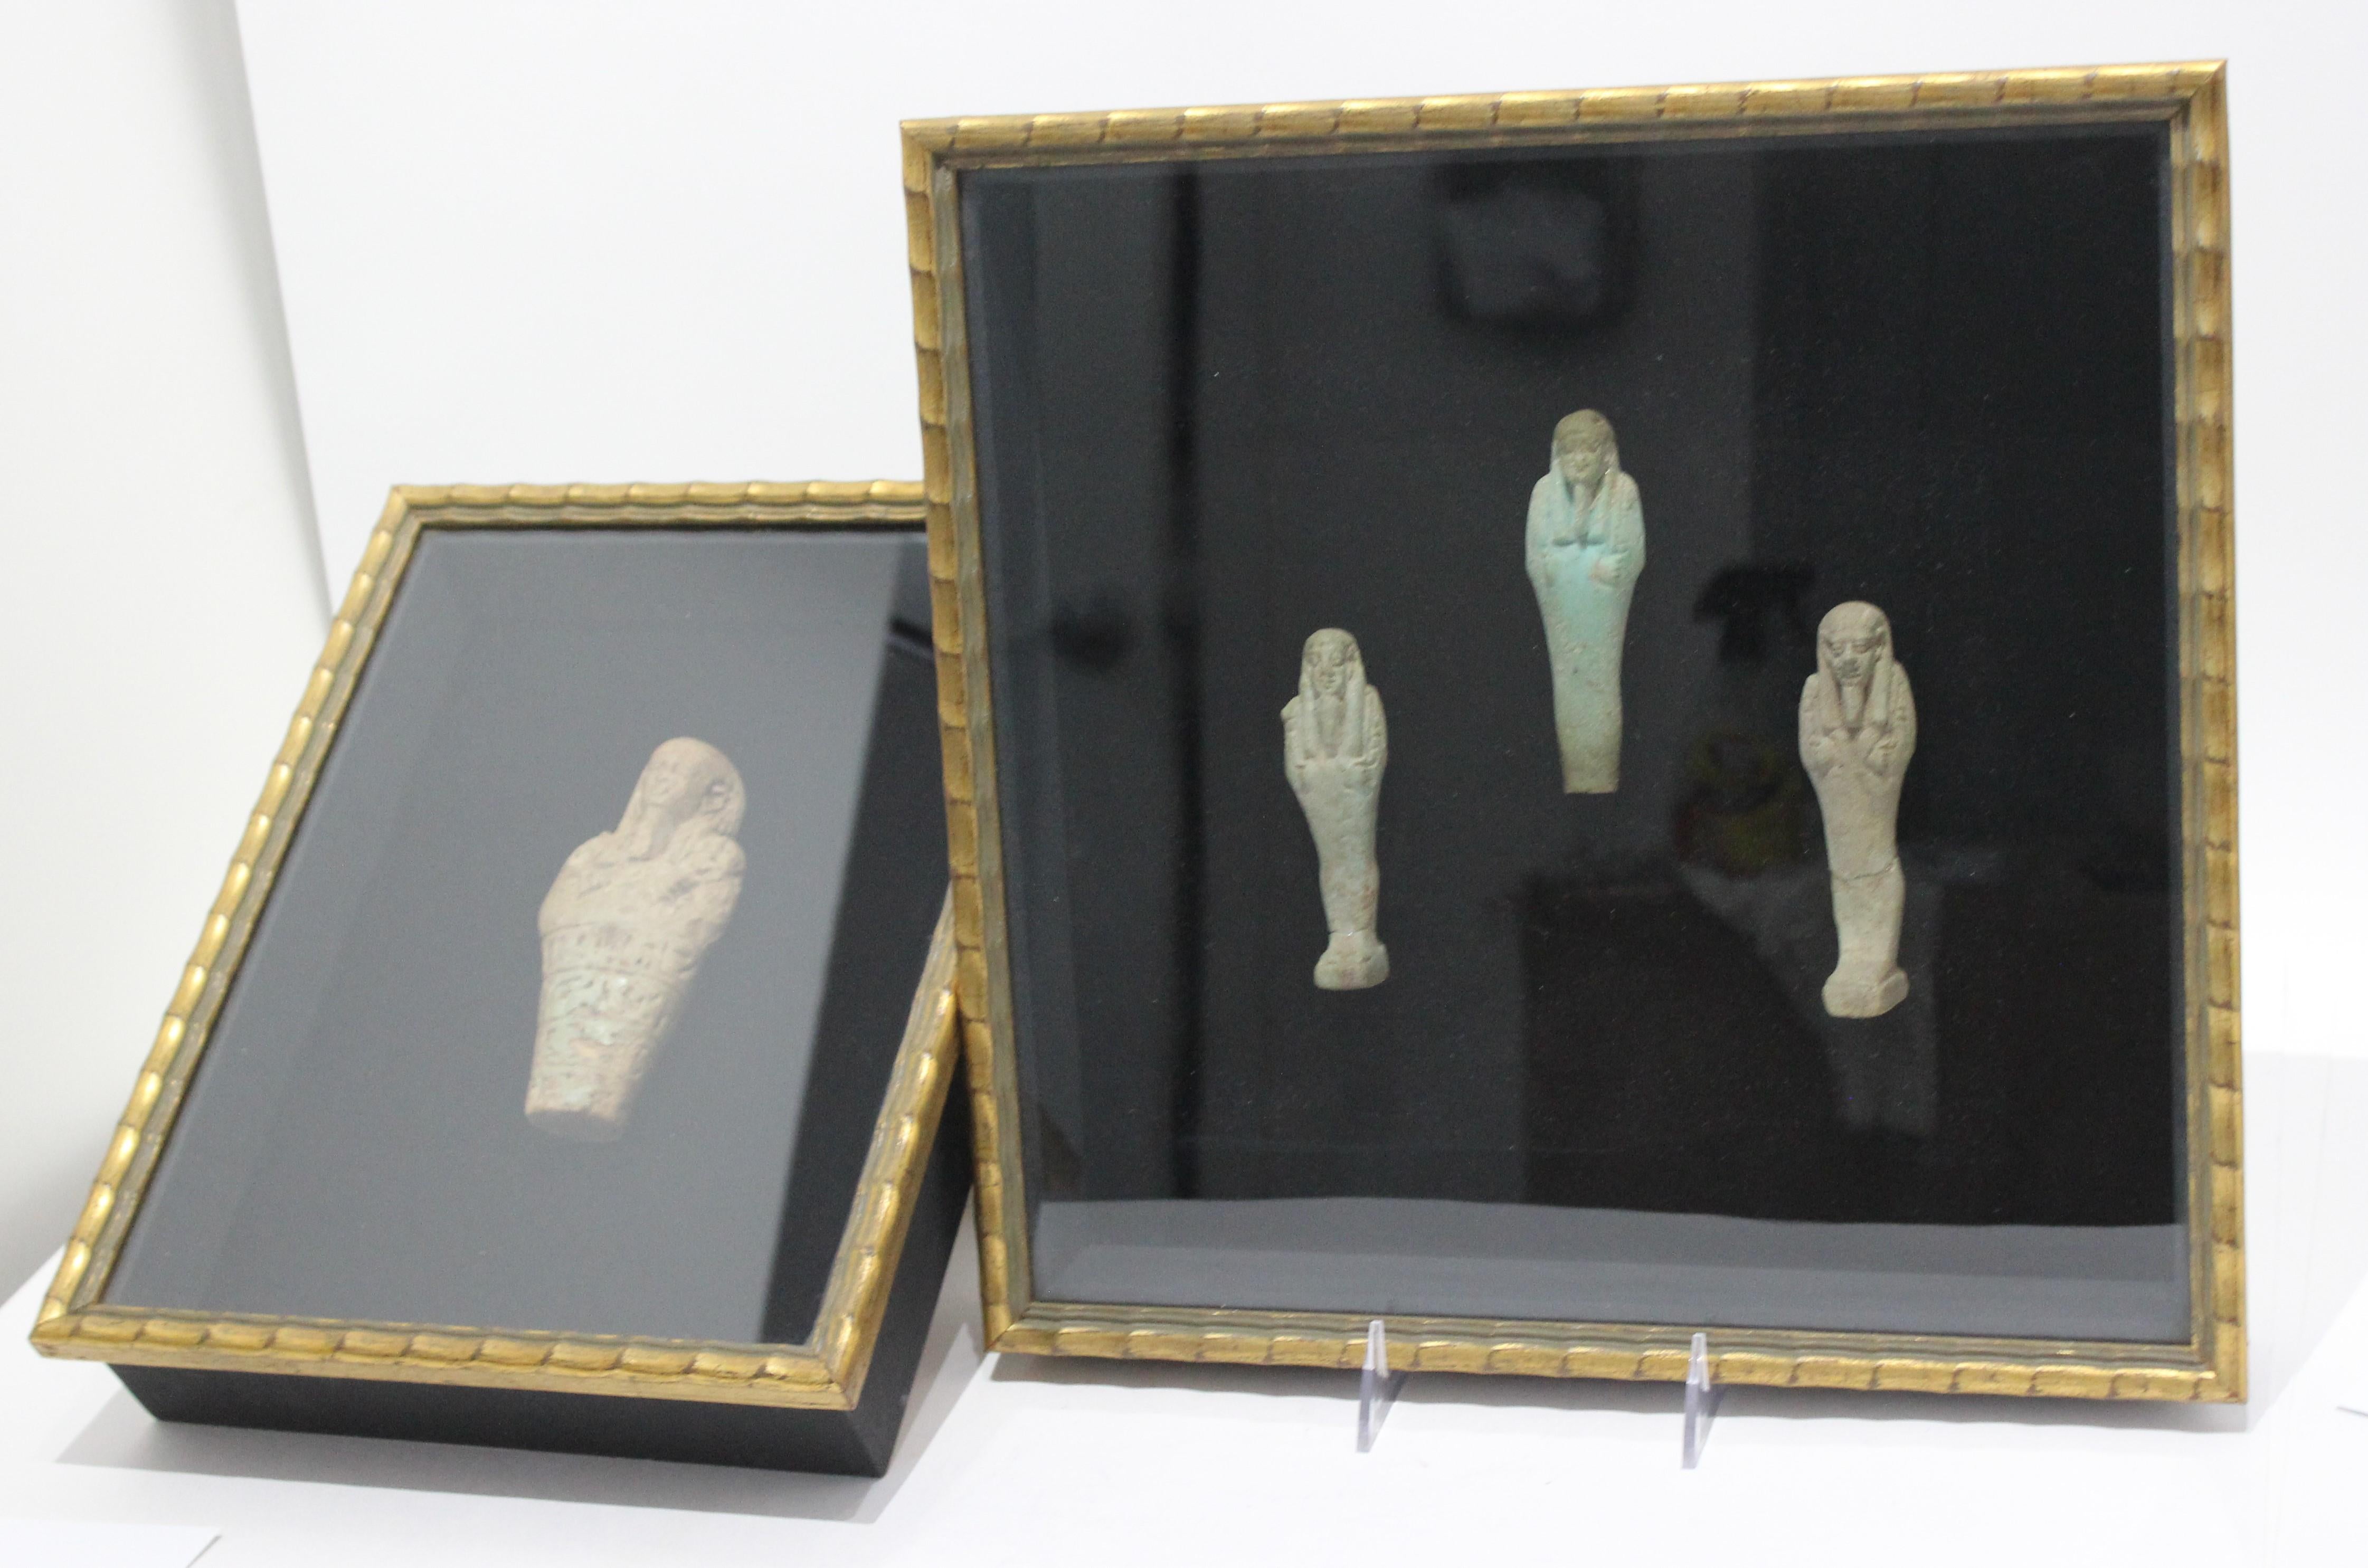 This stylish two-piece set of framed Egyptian Ushabti figures were acquired from a Palm Beach estate. And it would seem that the face on each piece are all the same man as was customary, so the gods of underworld would recognize and protect that